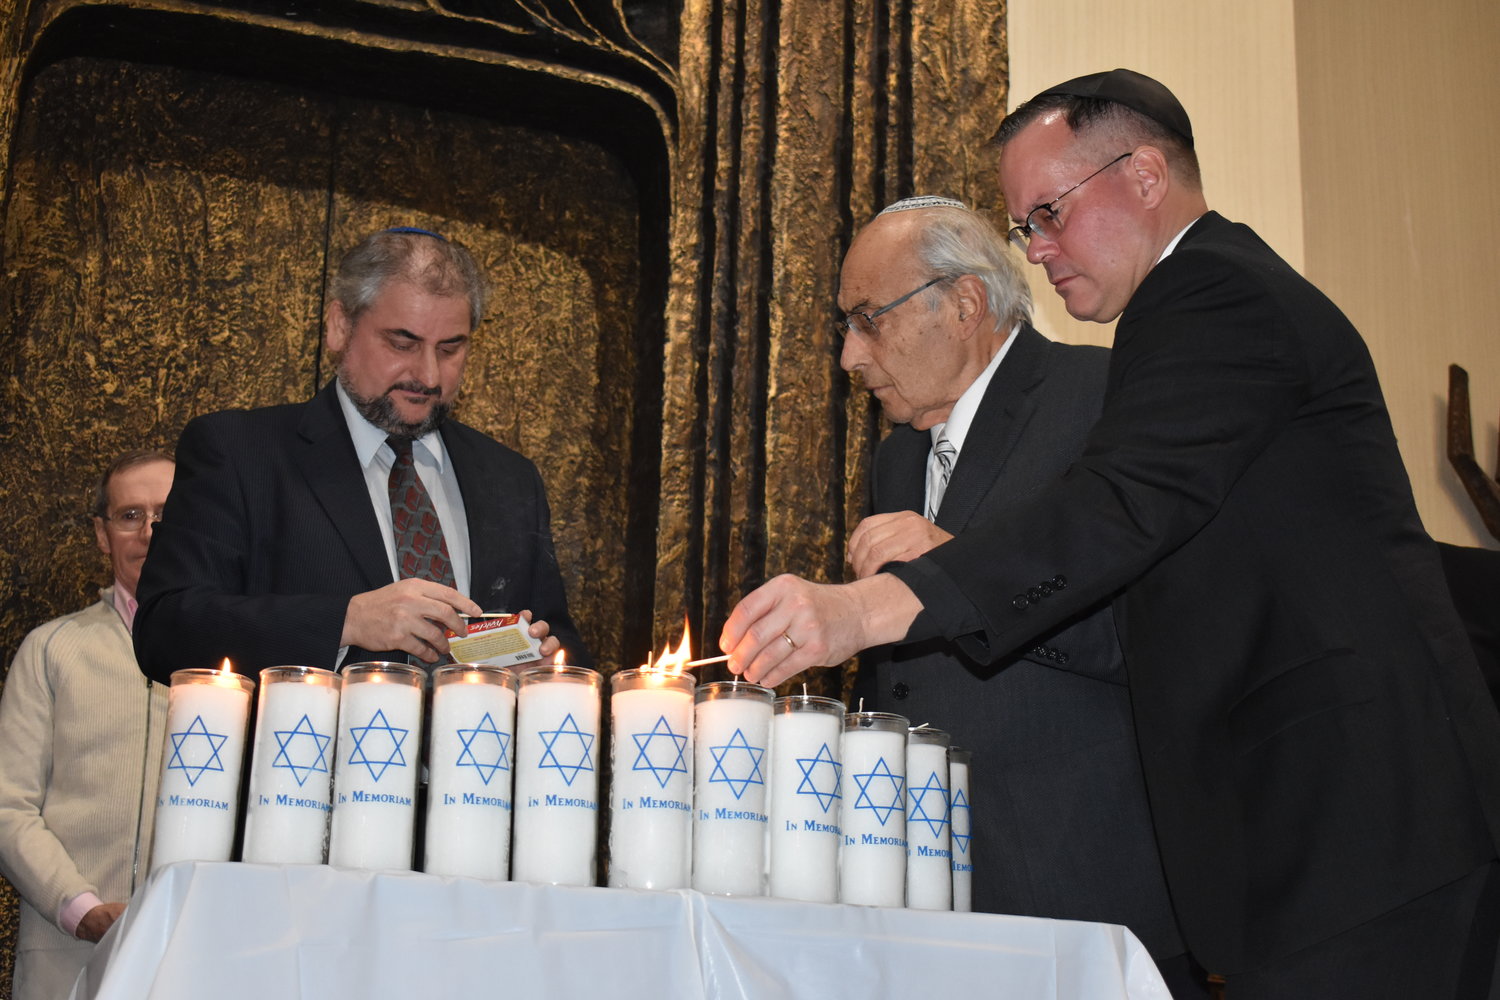 Candles were lit for each of the victims of the shooting at the Tree of Life Synagogue in Pittsburgh, from left, Rabbi Claudio Kupchick of Temple Beth El, center, Rabbi Arnold Marans of the Sephardic Temple and Father Christopher Ballard of Trinity-St. John’s Episcopal Church.